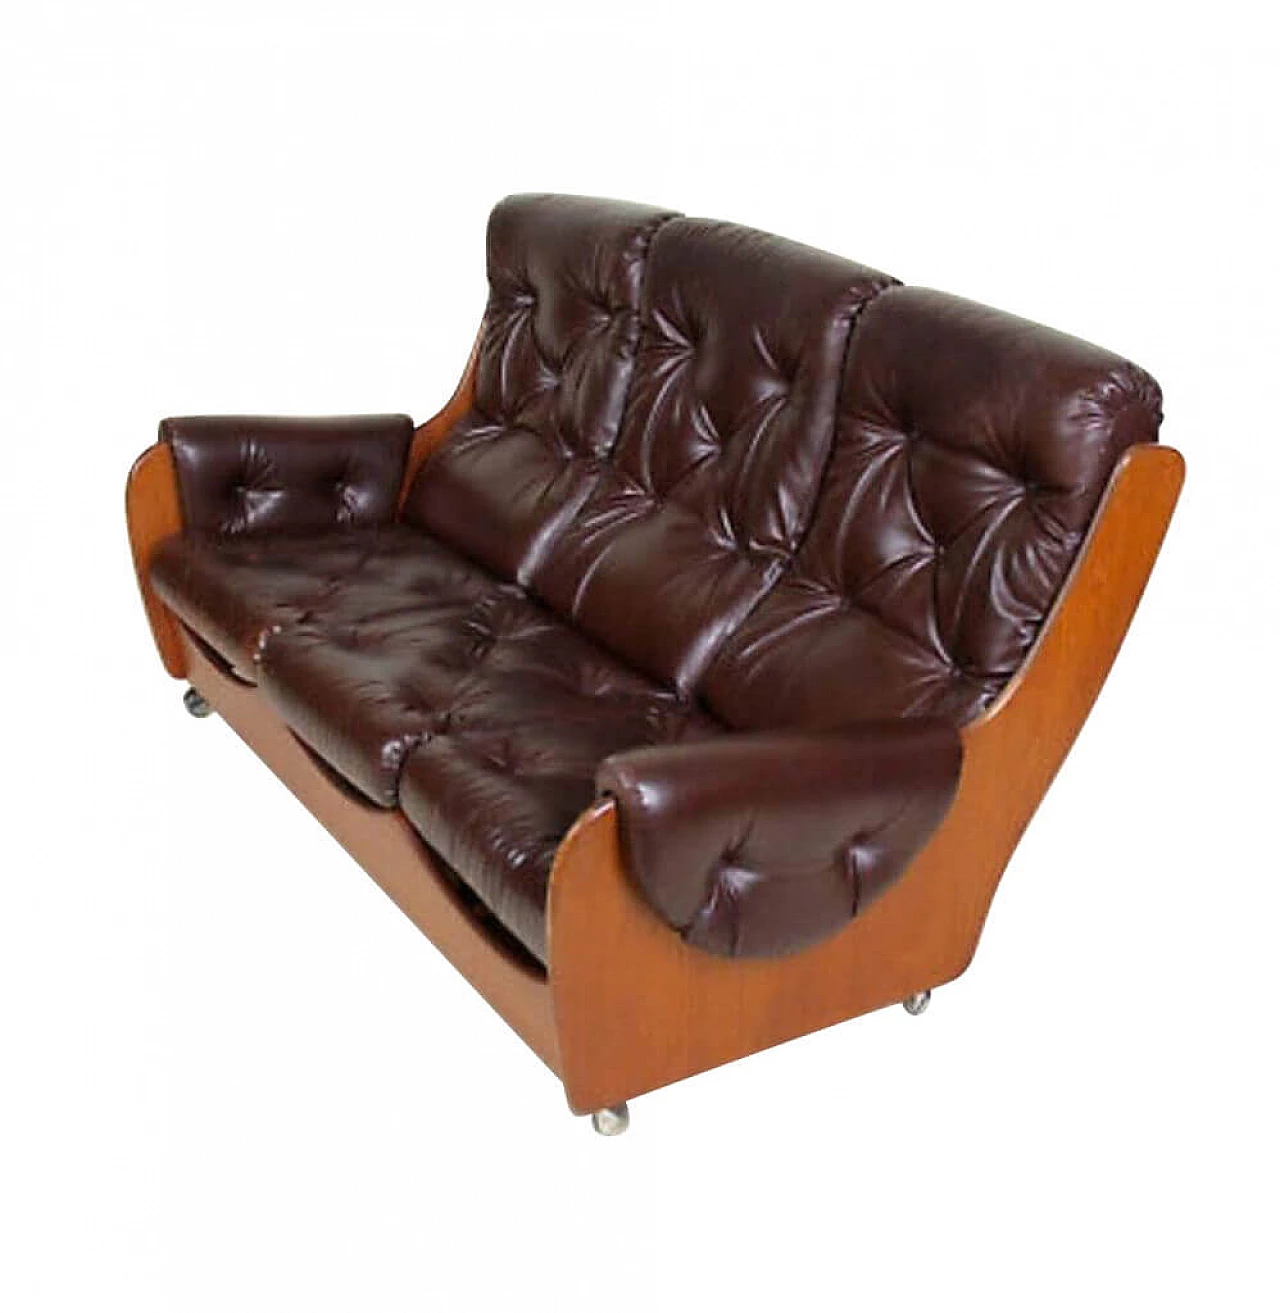 English leather and teak sofa by G. Plan, '70s 1191948